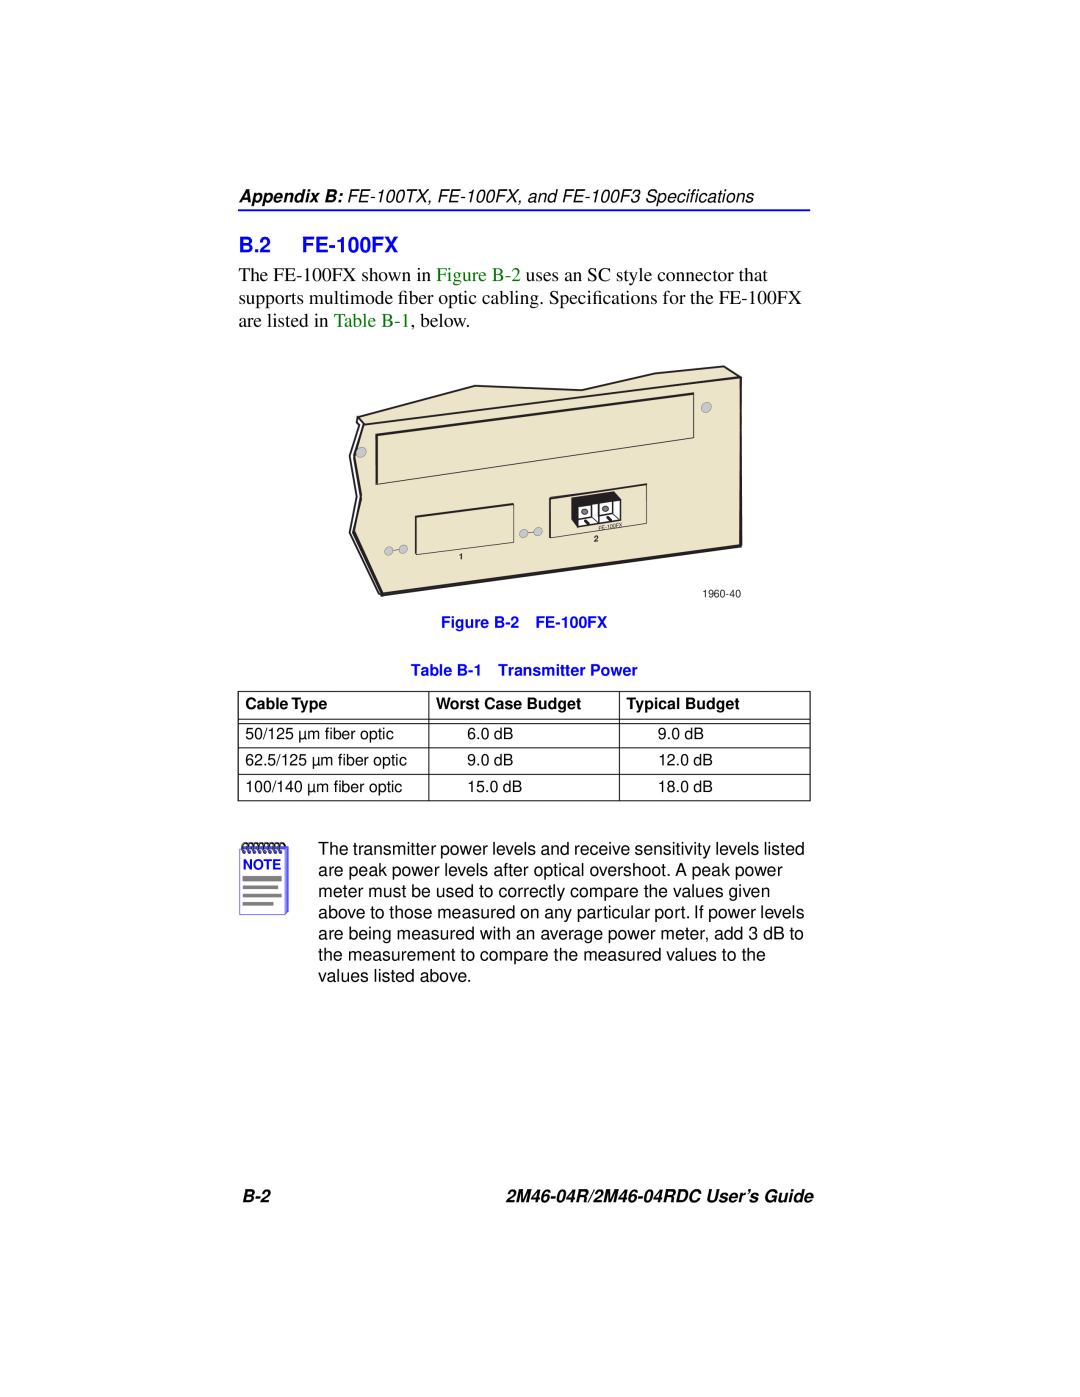 Cabletron Systems pmn manual B.2 FE-100FX, Appendix B FE-100TX, FE-100FX, and FE-100F3 Speciﬁcations 